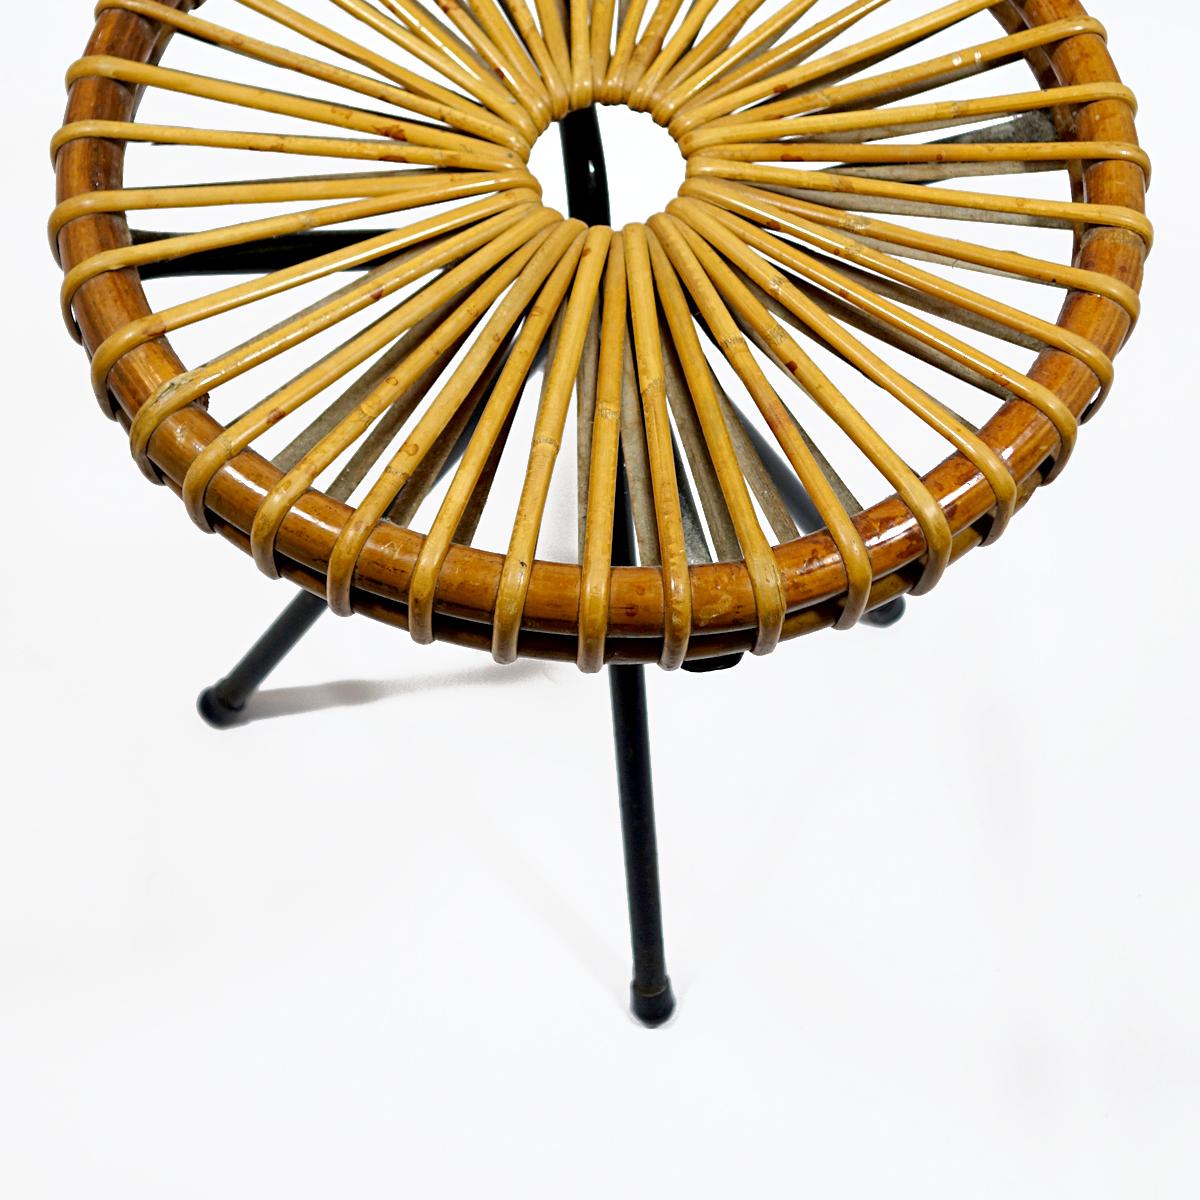 Mid-20th Century Midcentury Rattan and Metal Stool Designed by Dirk van Sliedregt for Rohé